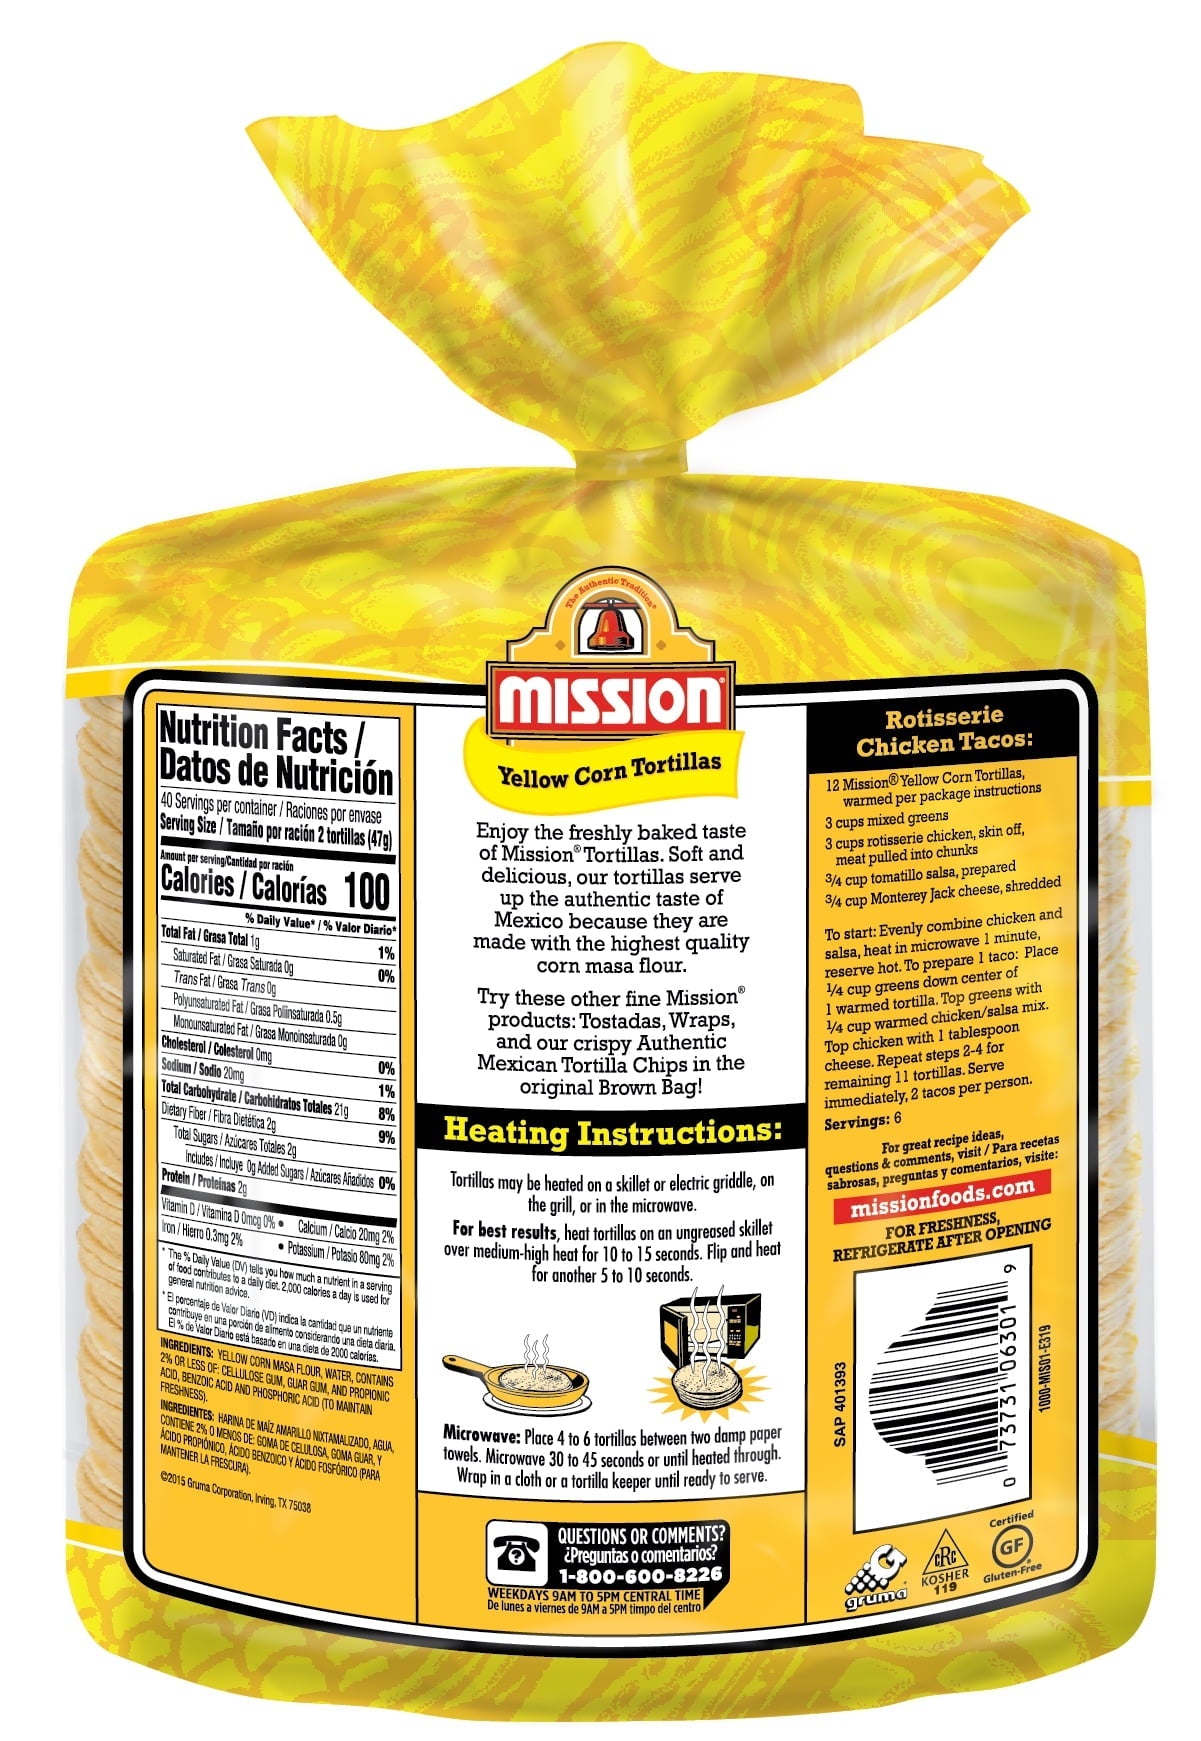 Mission Yellow Corn Tortillas, 80 Count